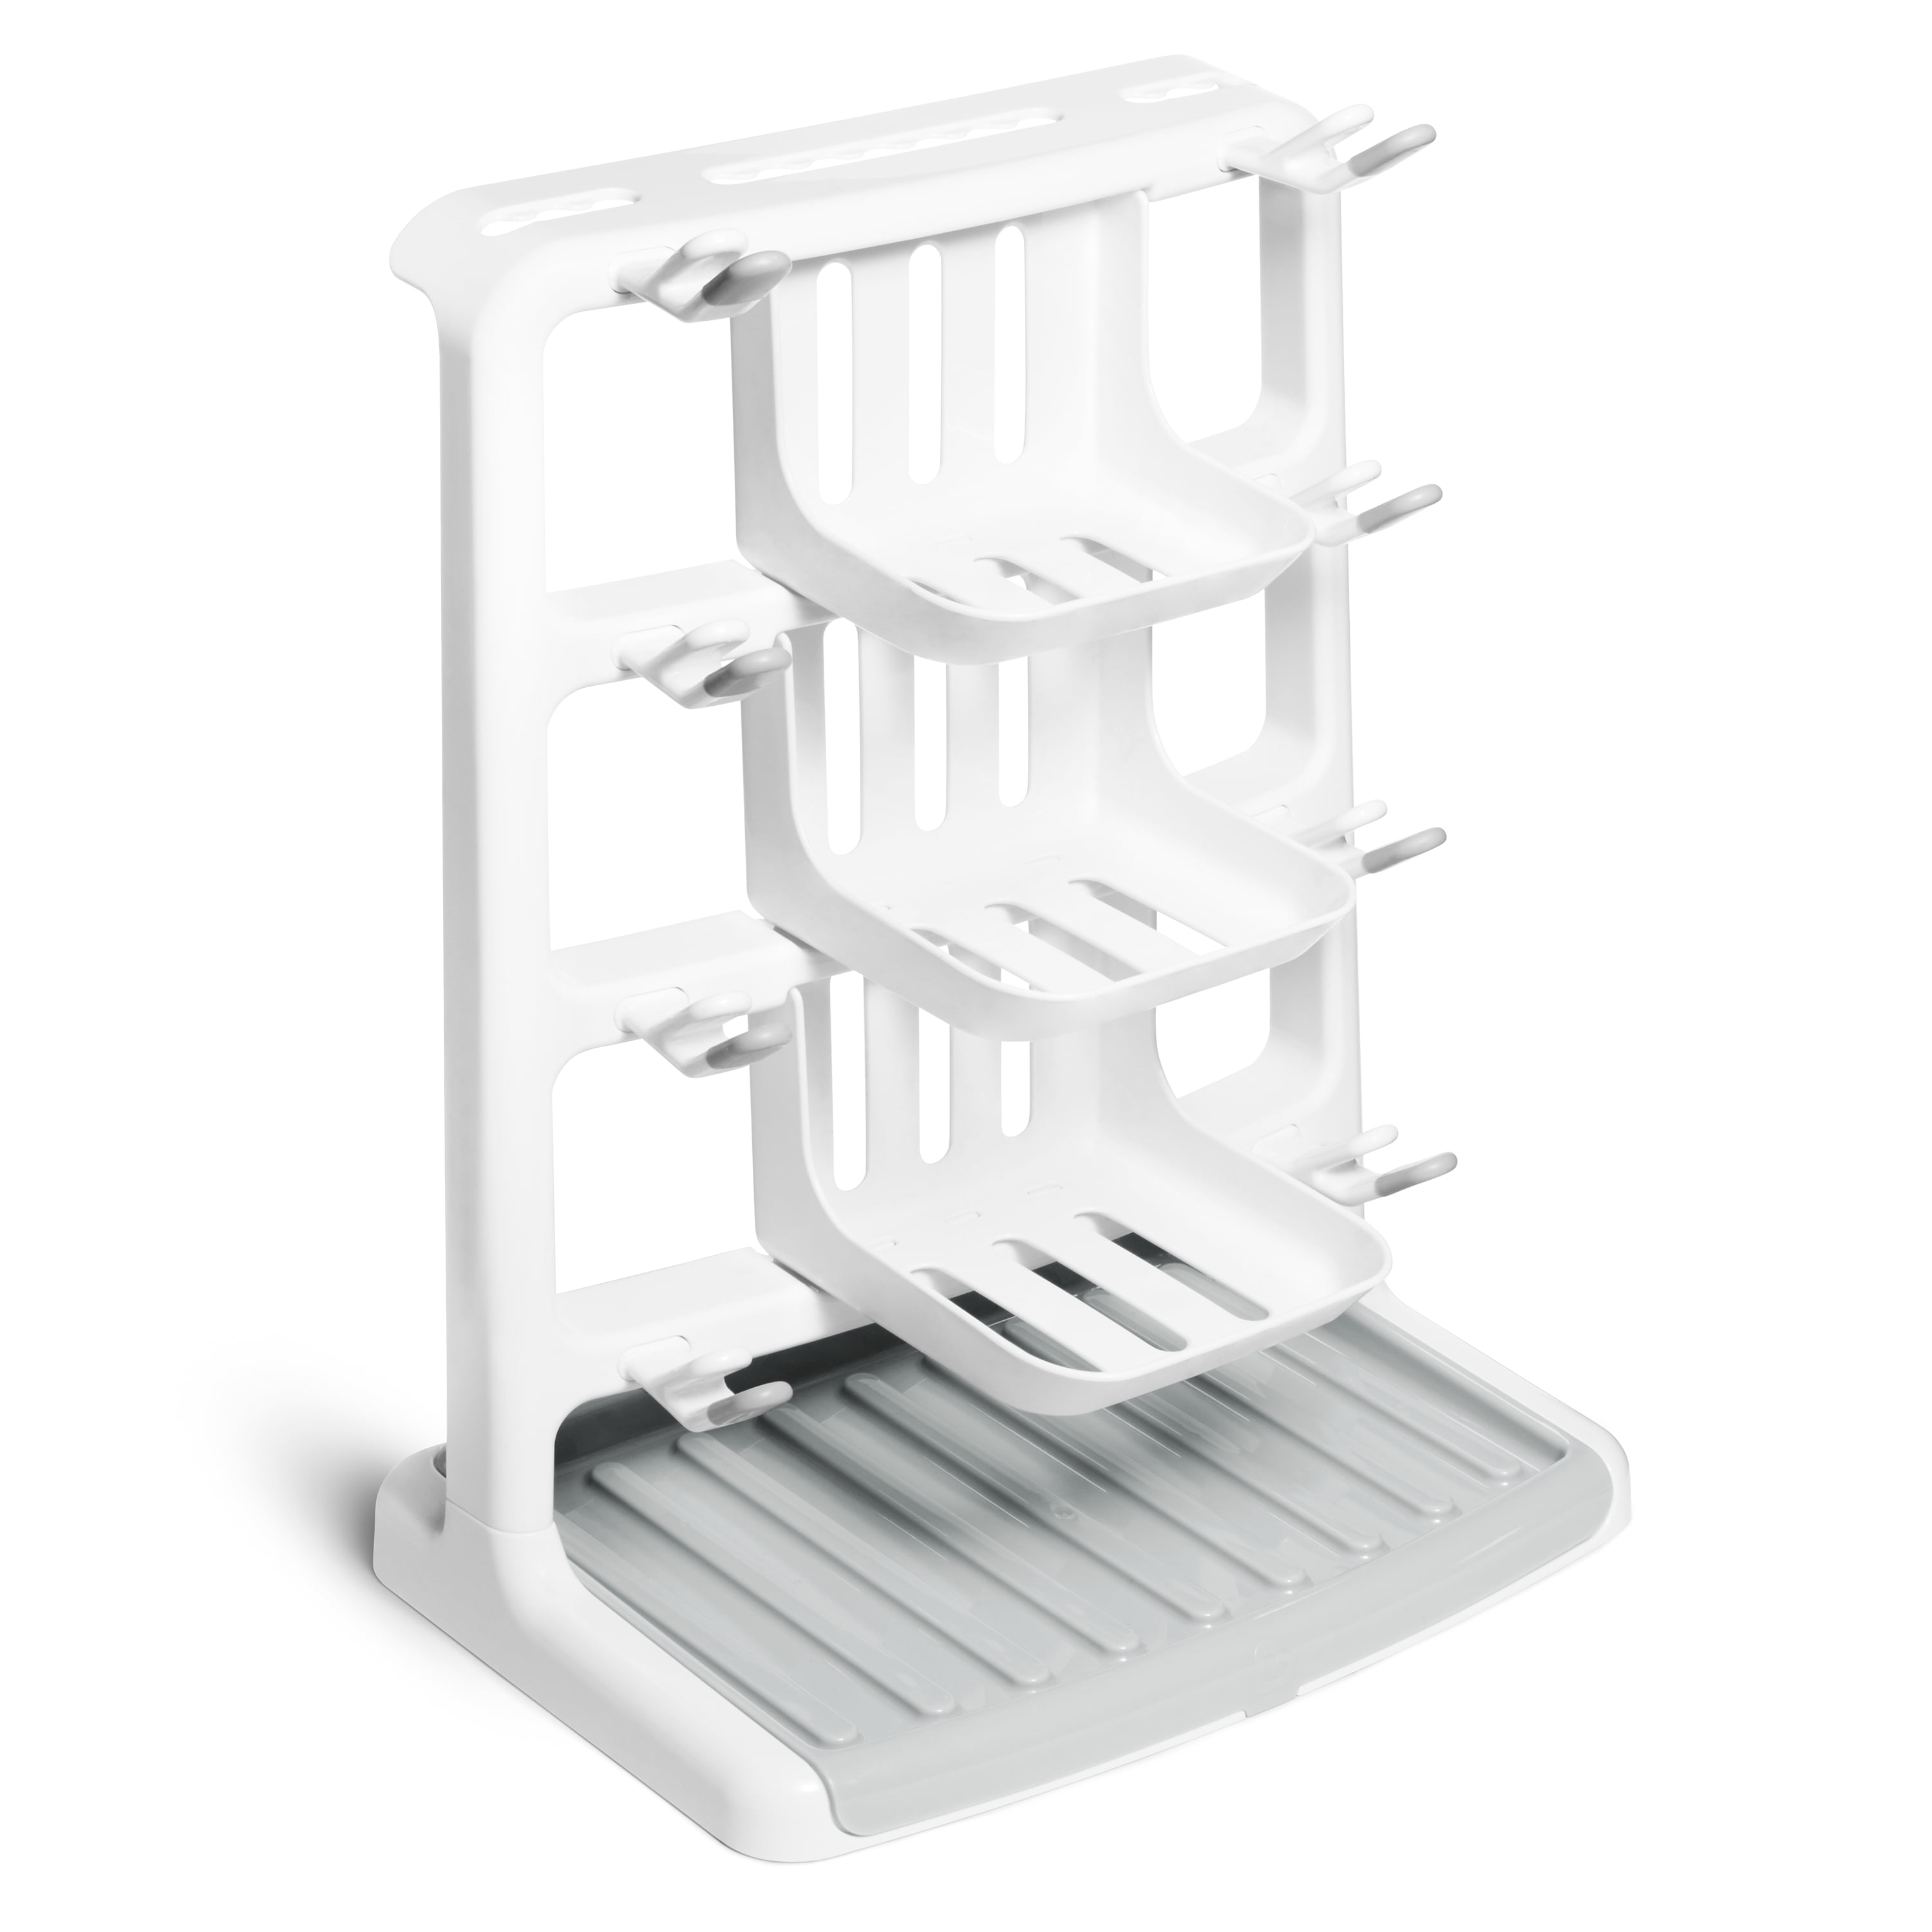 OXO Tot Bottle Drying Rack  Fits At Least 8 Baby Bottles and Their Parts